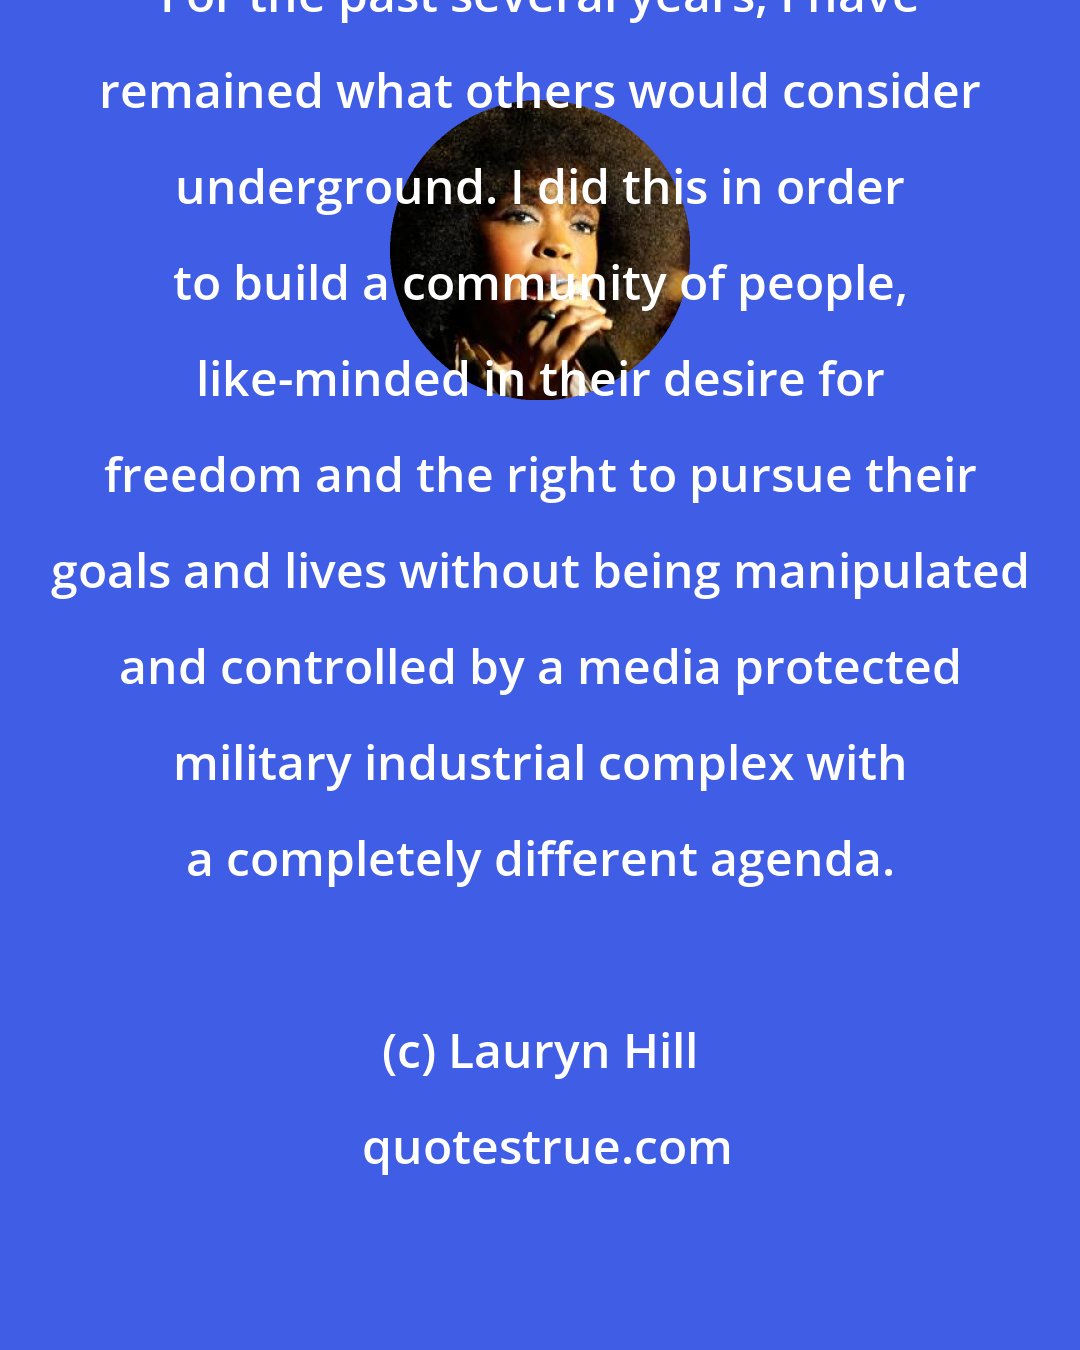 Lauryn Hill: For the past several years, I have remained what others would consider underground. I did this in order to build a community of people, like-minded in their desire for freedom and the right to pursue their goals and lives without being manipulated and controlled by a media protected military industrial complex with a completely different agenda.